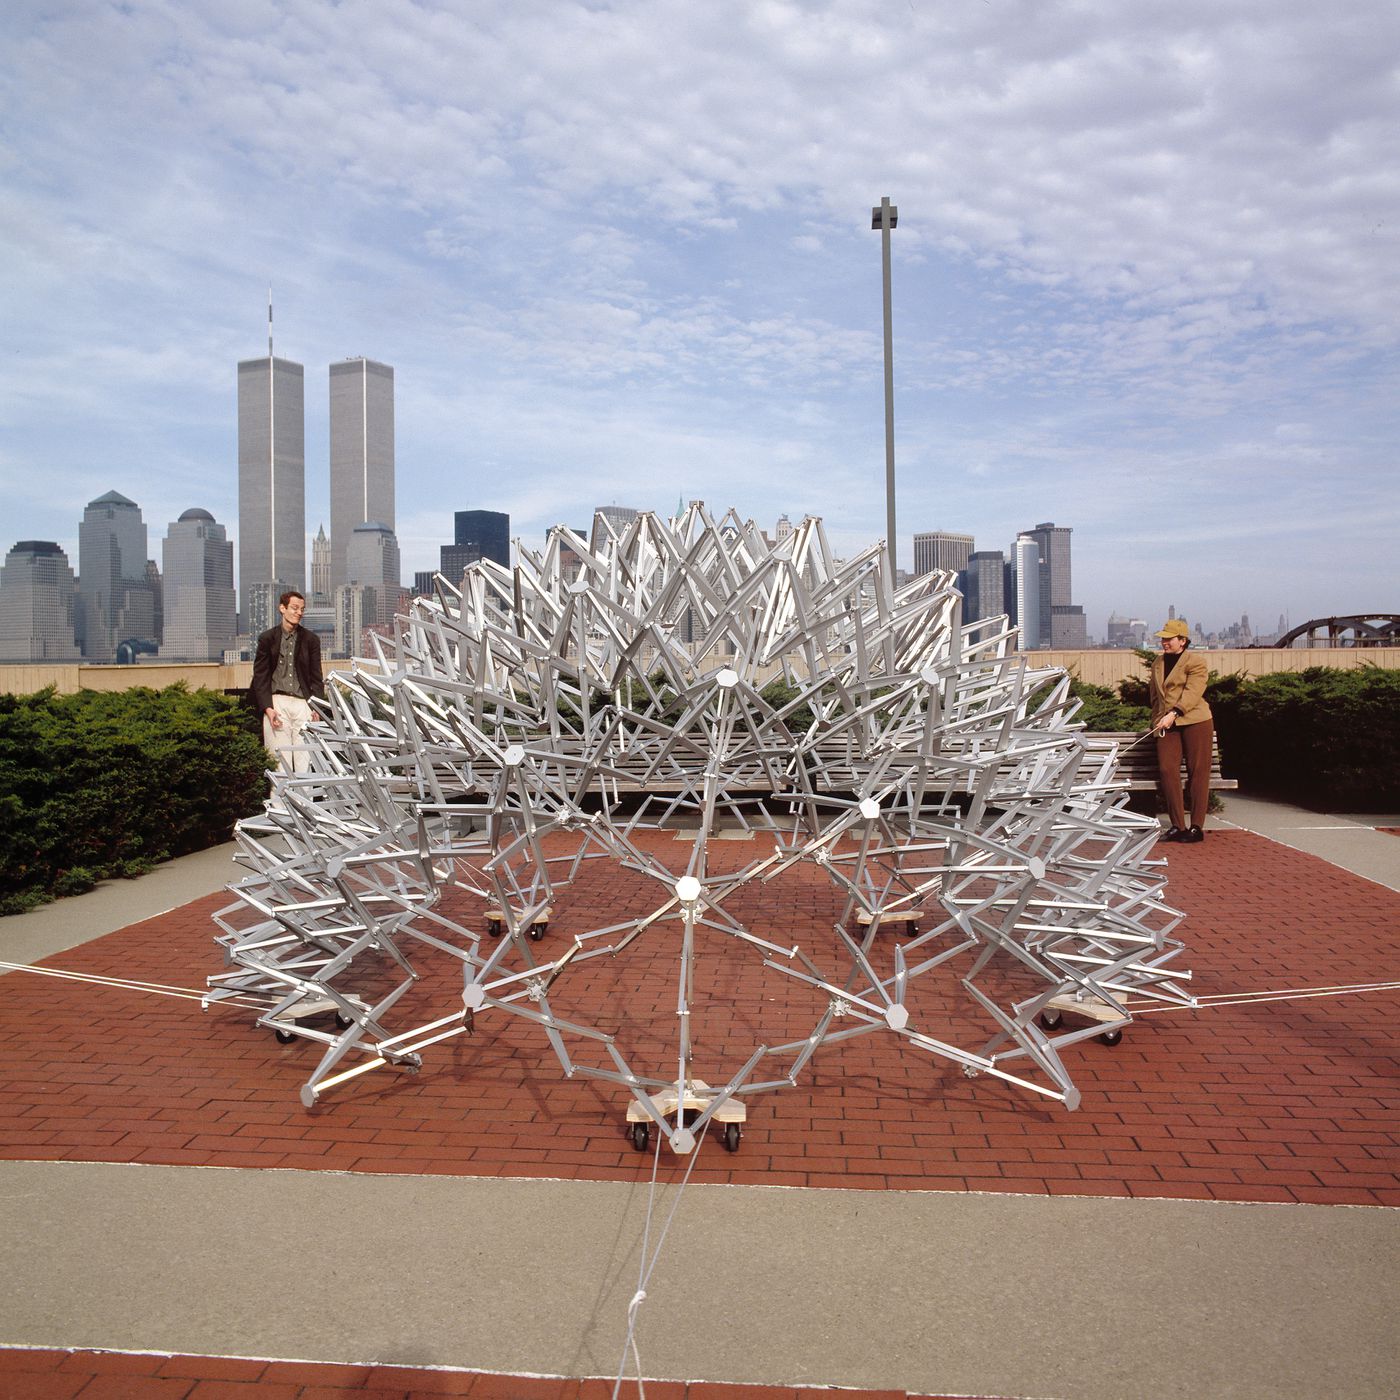 Demonstration of the Expanding Geodesic Dome, Liberty State Park, Jersey City, New Jersey.